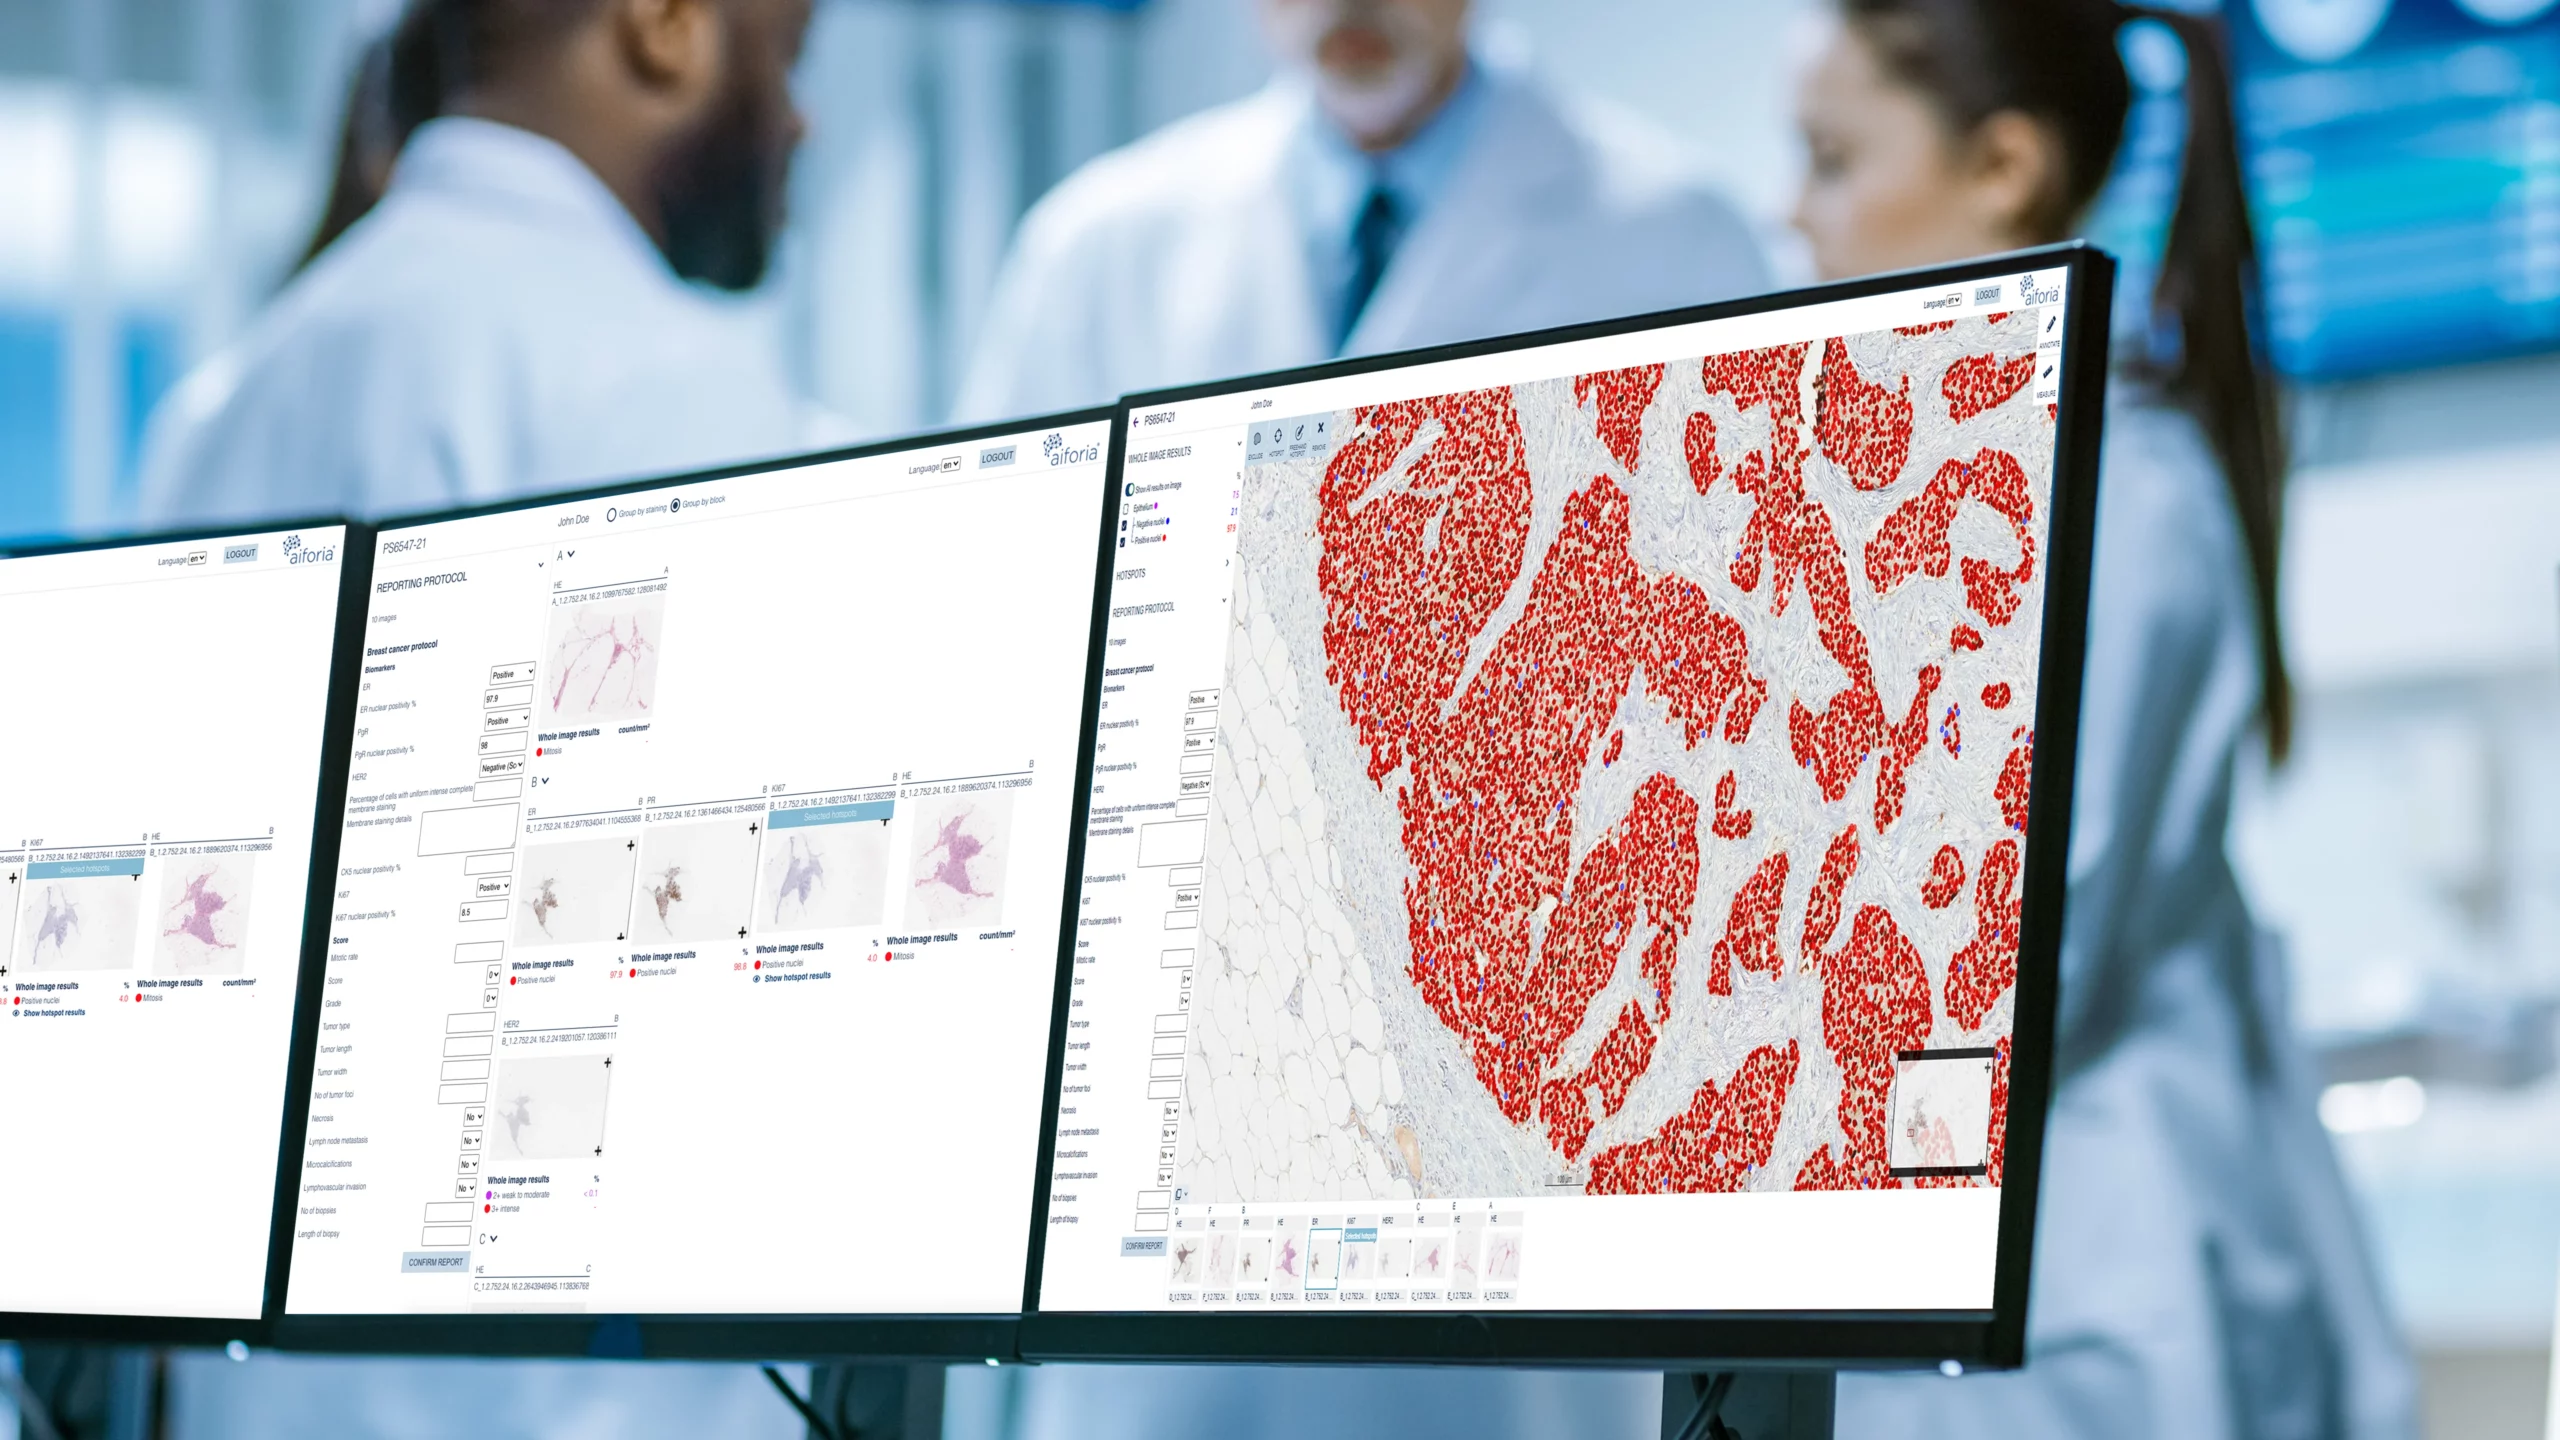 Mayo Clinic, Aiforia Partner on AI Model for Colorectal Cancer Recurrence